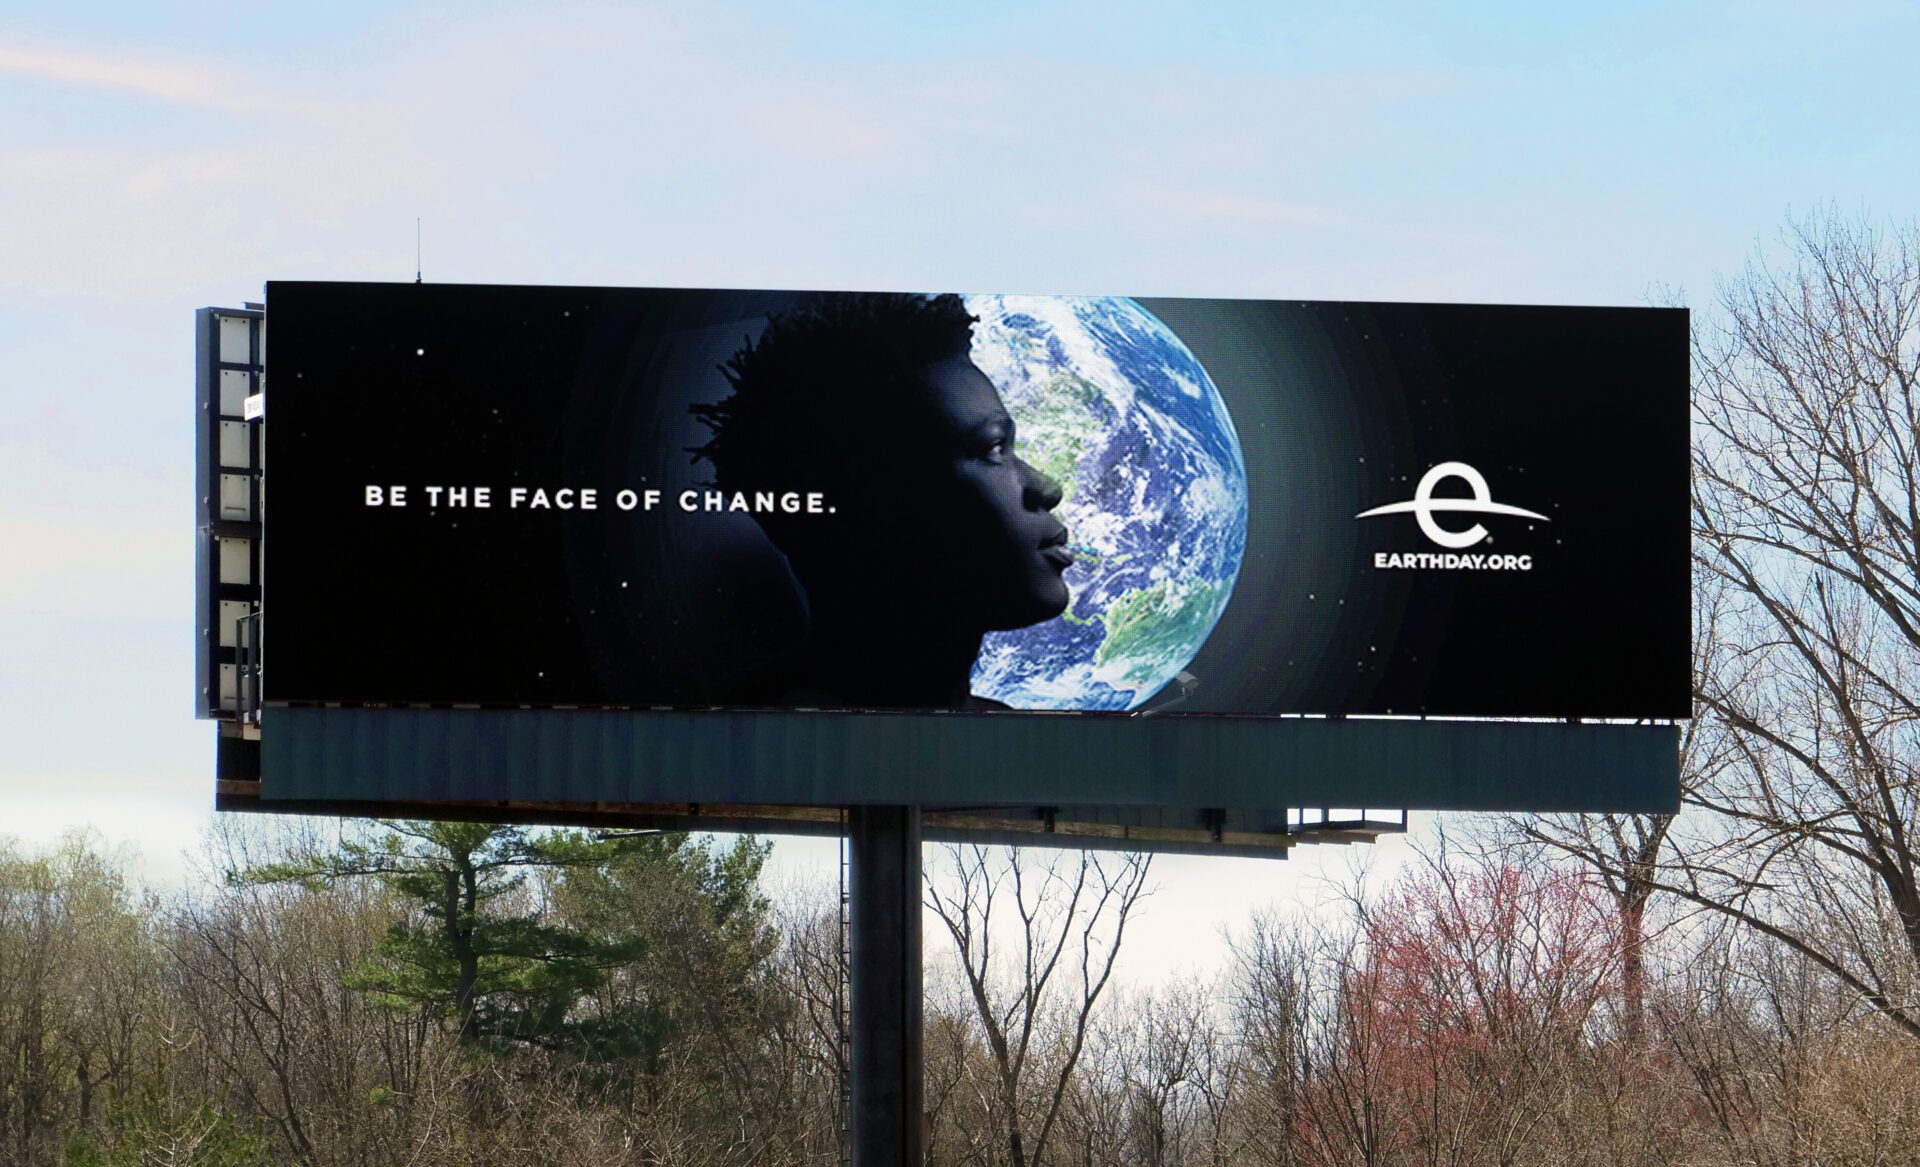 Out of home bulletin for Earthday.org. Be the face of change.